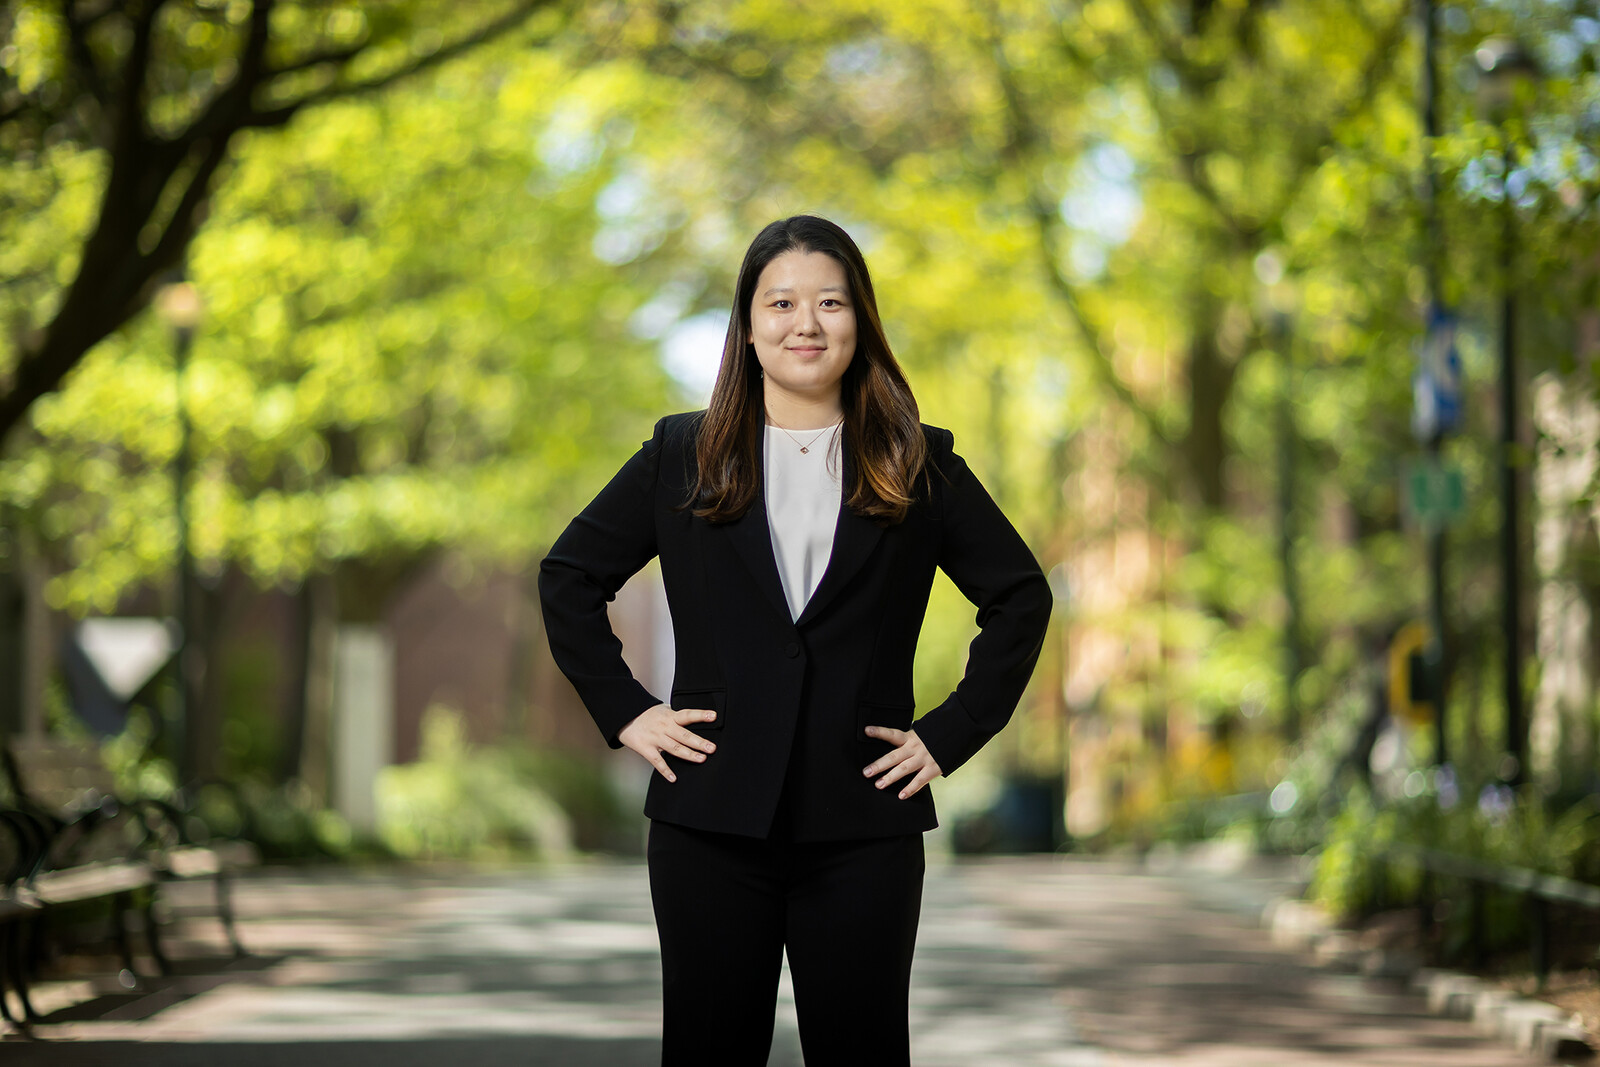 Seungwon (Lucy) Lee C’23, was among the 2023 President’s Engagement Prize winners for founding "Communities for Childbirth" 